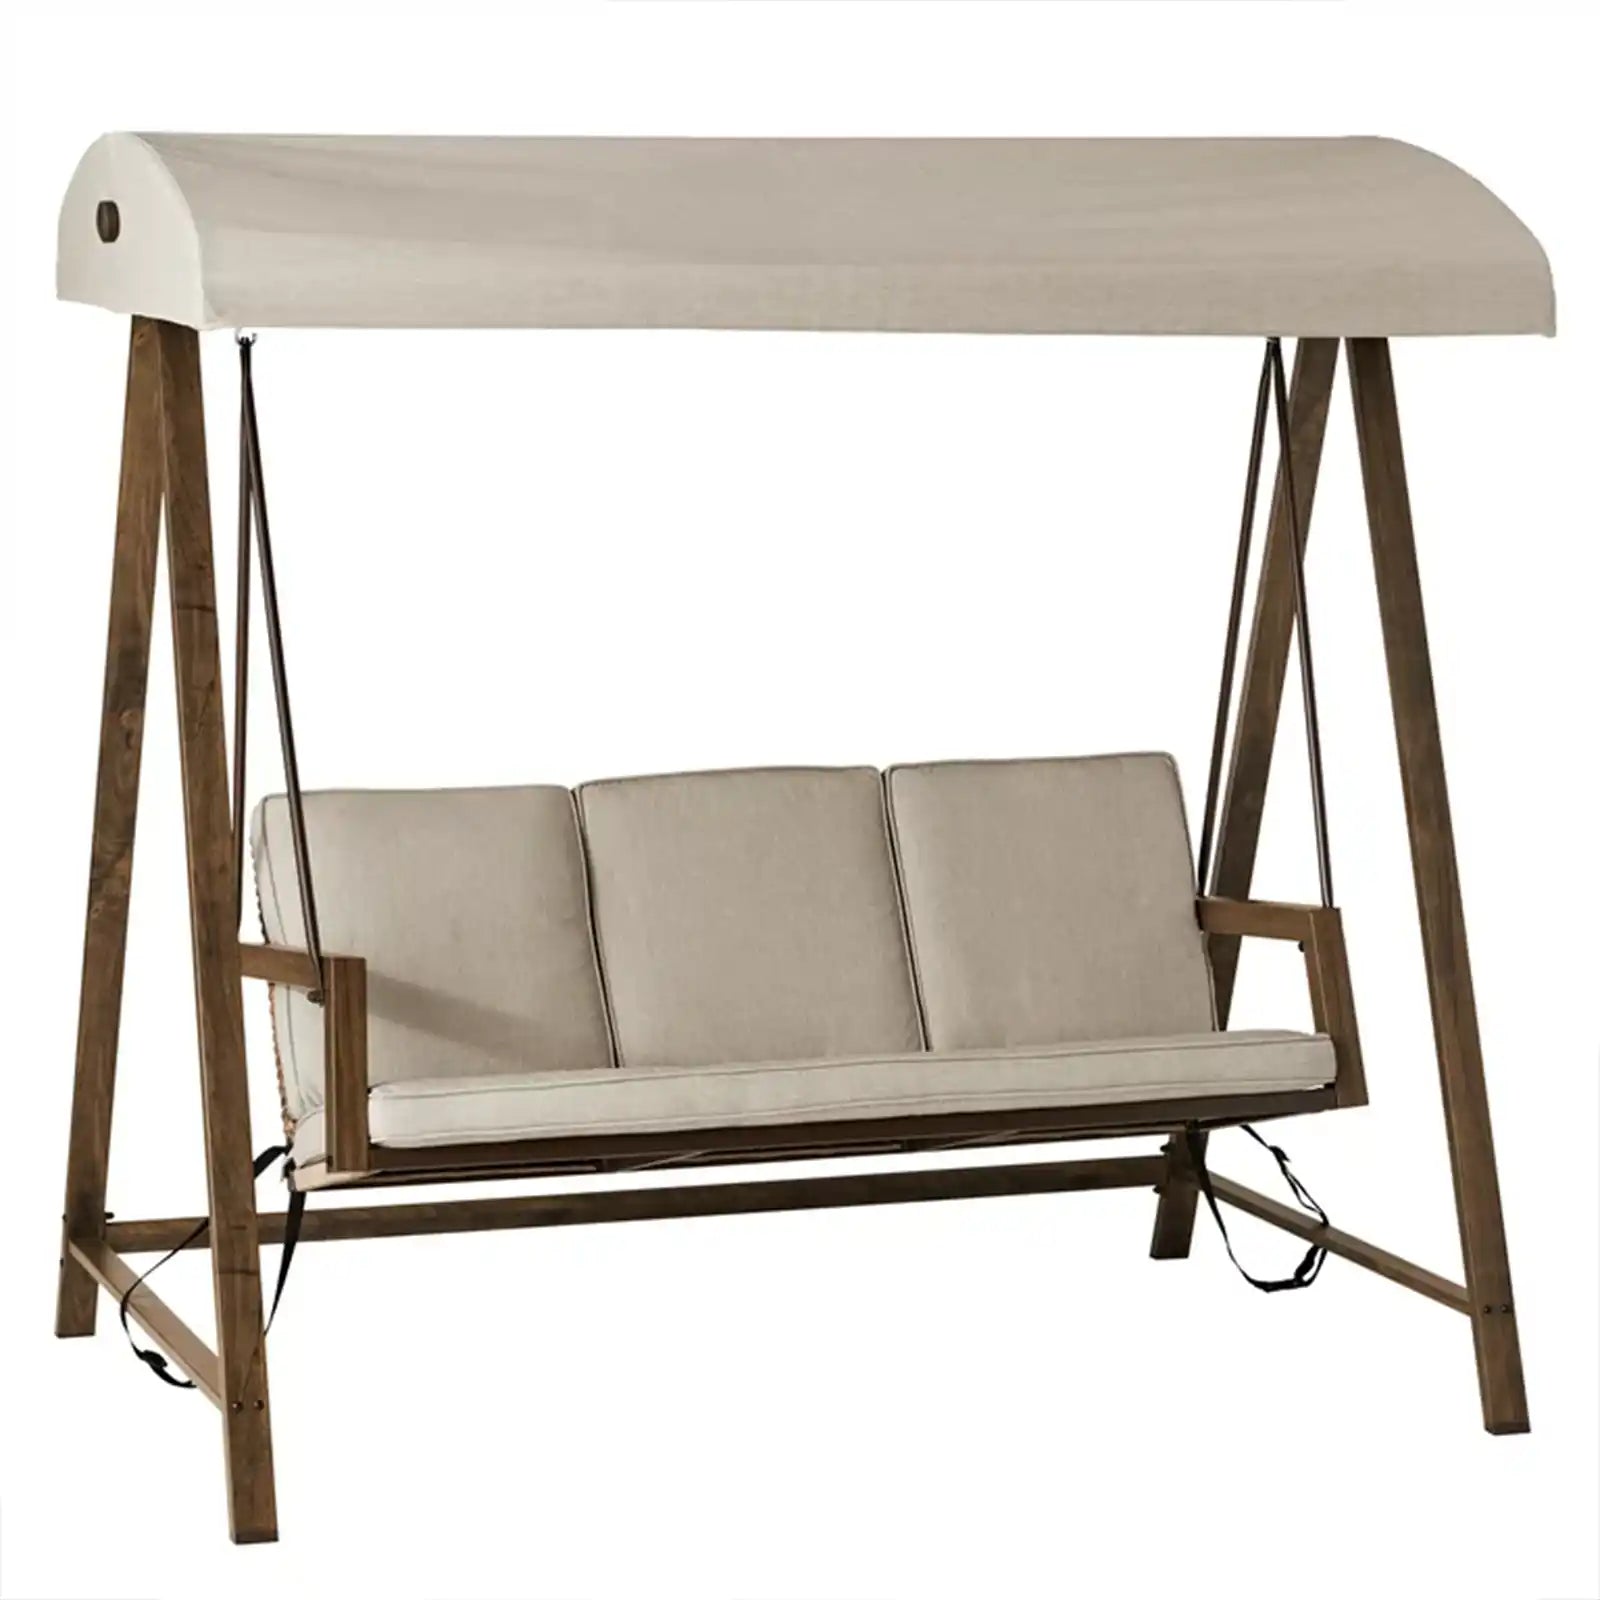 Canopy Steel Porch Swing - Brown and Tan